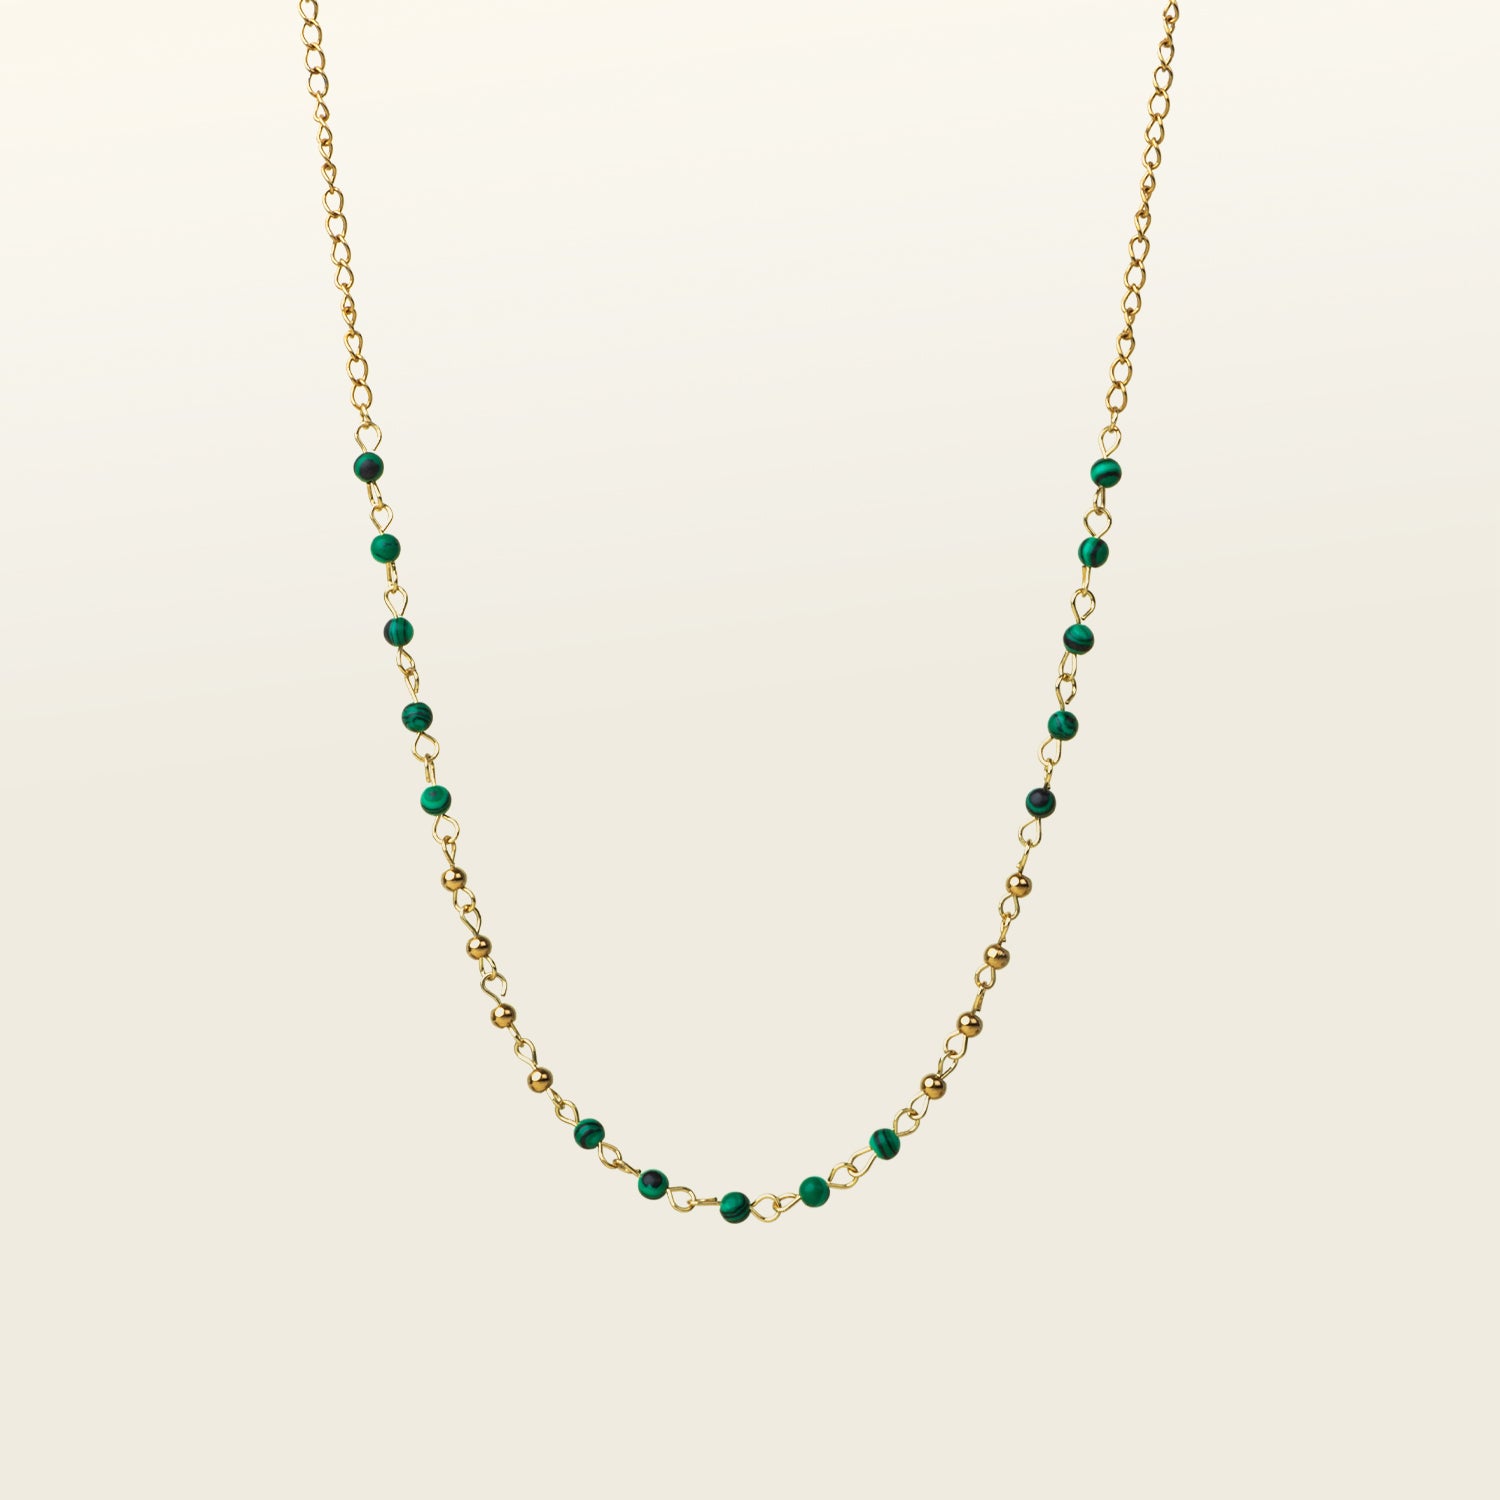 Image of the Lyra Chain Necklace is adjustable for your comfort and convenience. It is crafted from 18K Gold Plated Stainless Steel, with a Natural Malachite stone embedded in the chain for a stunning look. This product is non-tarnish and waterproof for lasting usage.